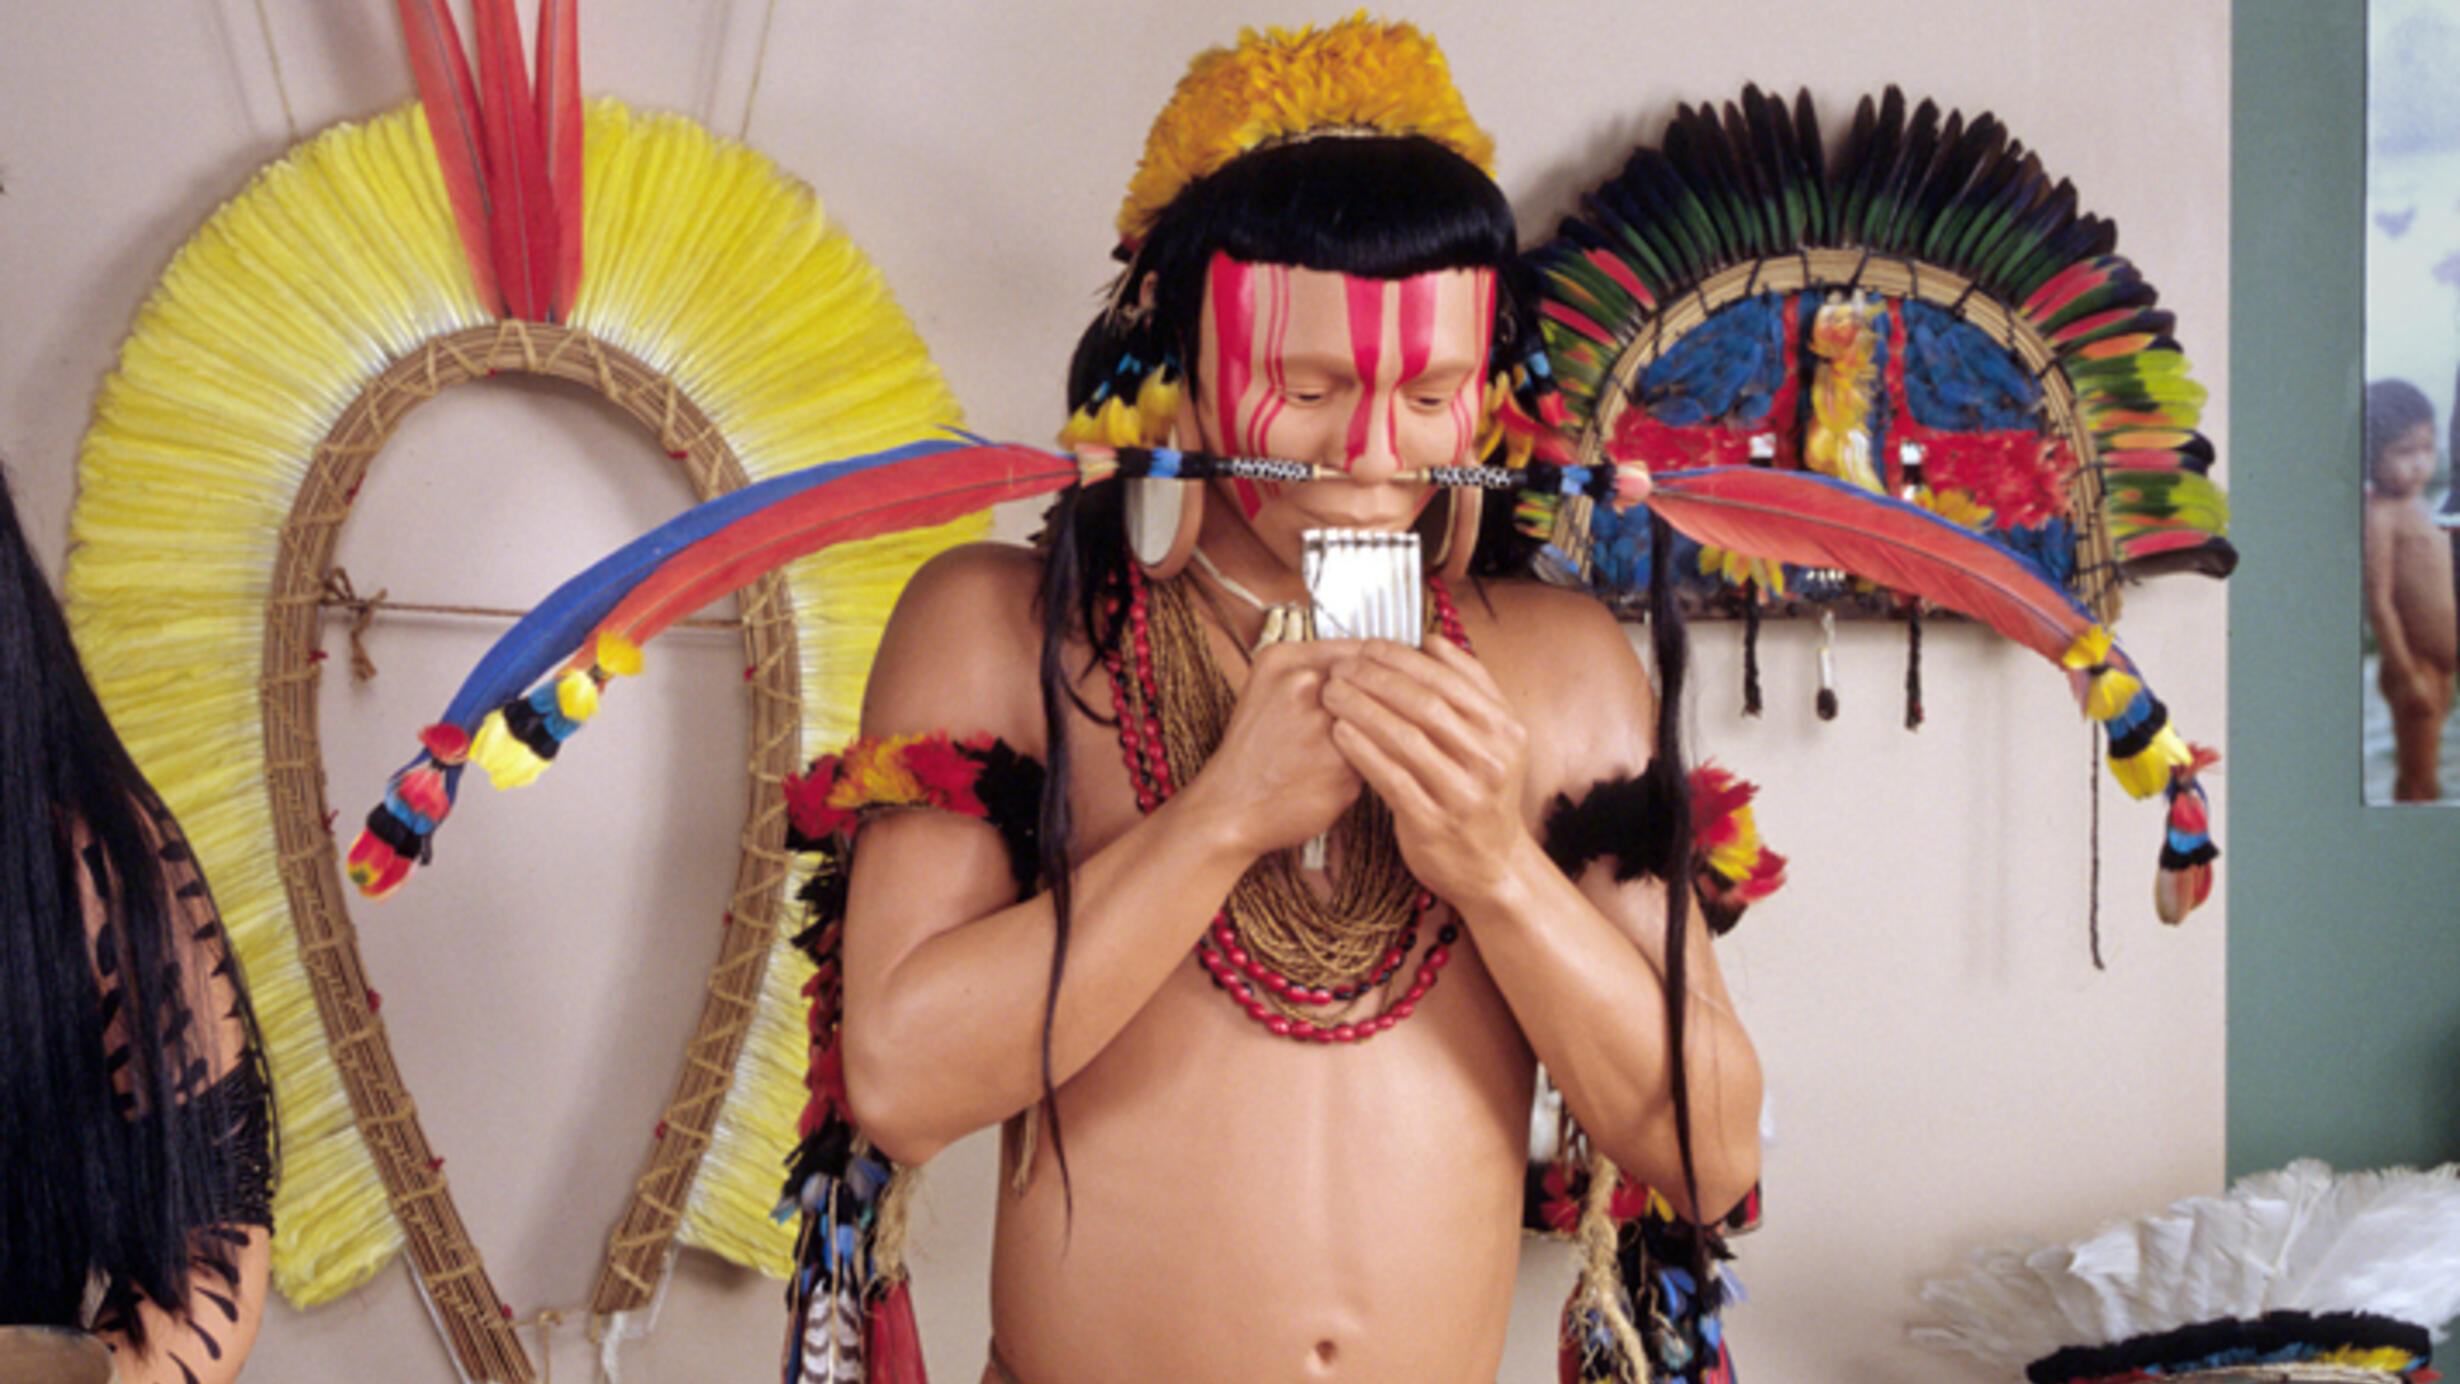 A model of a human adorned with face paint of vertical red stripes, a horizontal nose piercing through the septum with a thin rod with long colorful feathers at each end, many strings of beaded necklaces around the neck and feather arm bands.